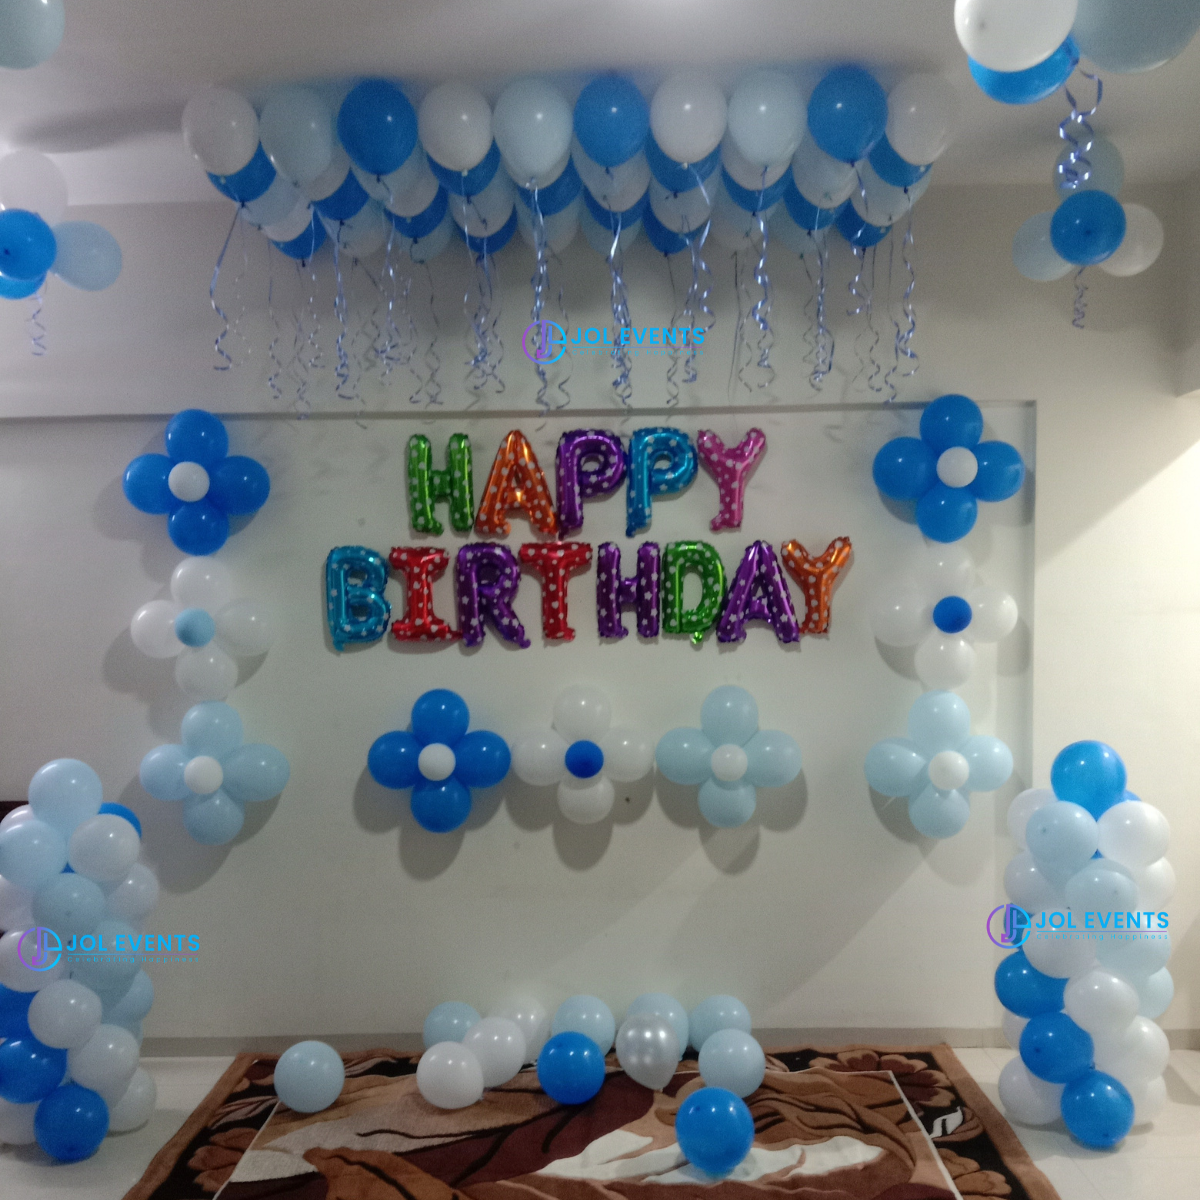 Simple Balloon Decoration for Birthday – jolevents